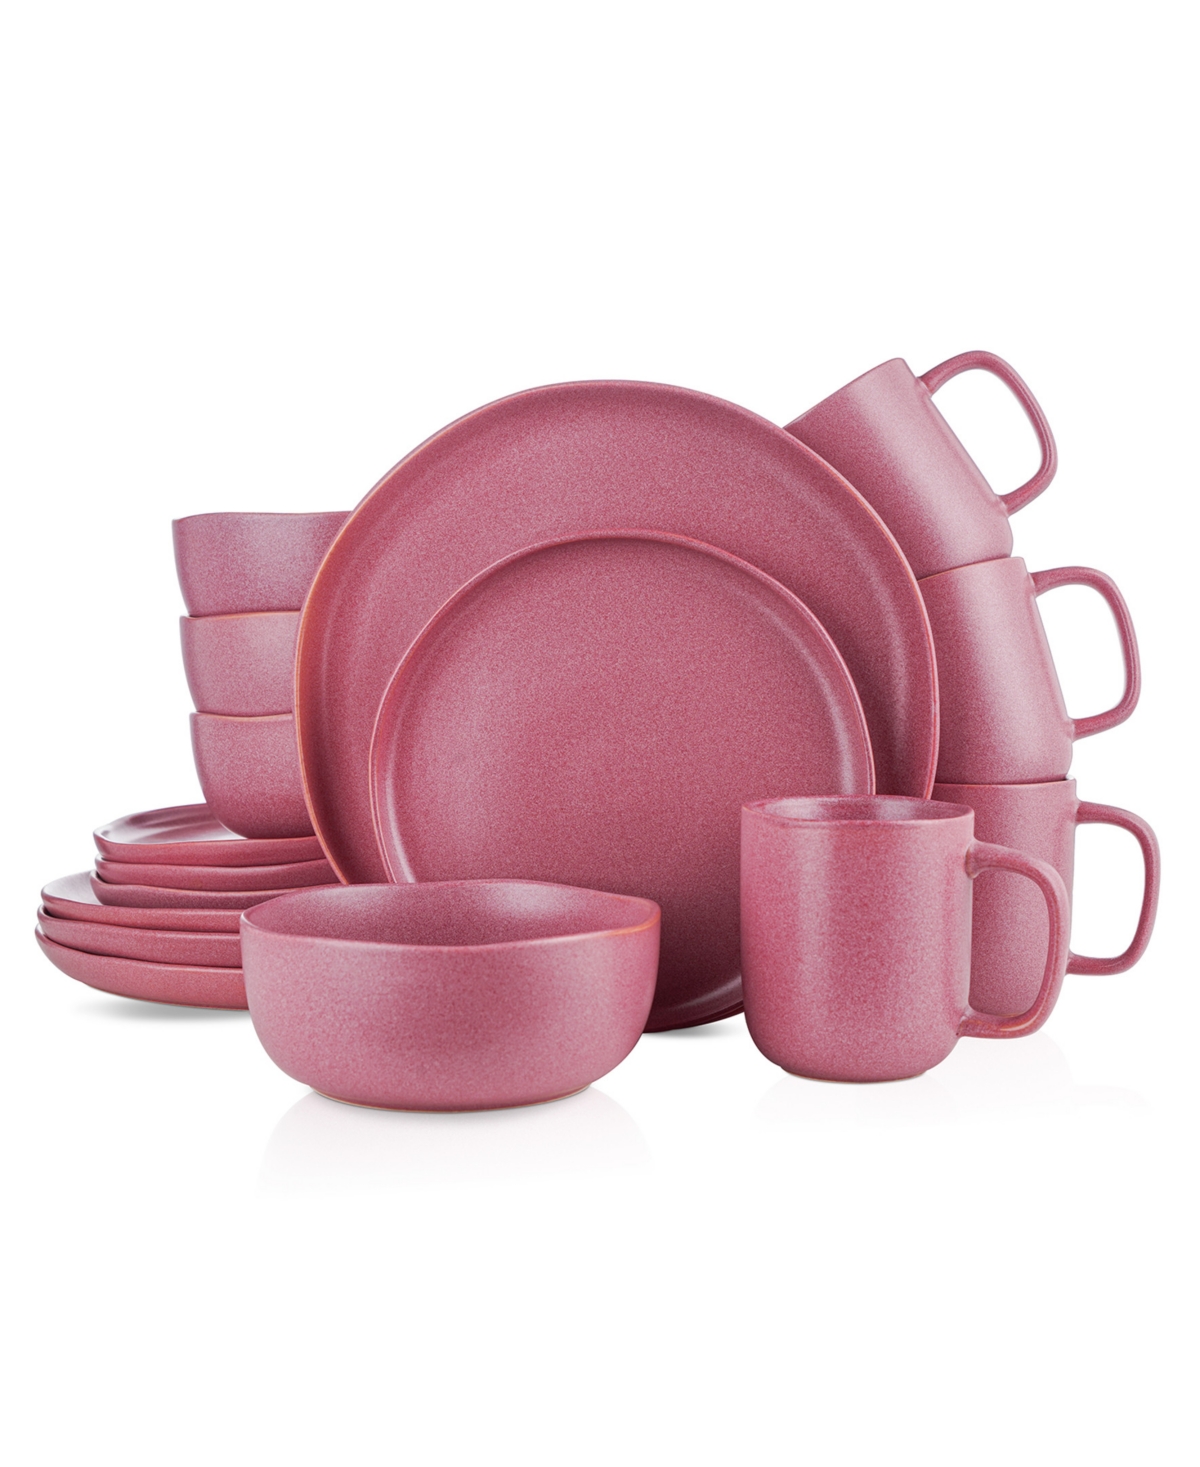 Tom 16 Pieces Dinnerware Set, Service For 4 - Pink